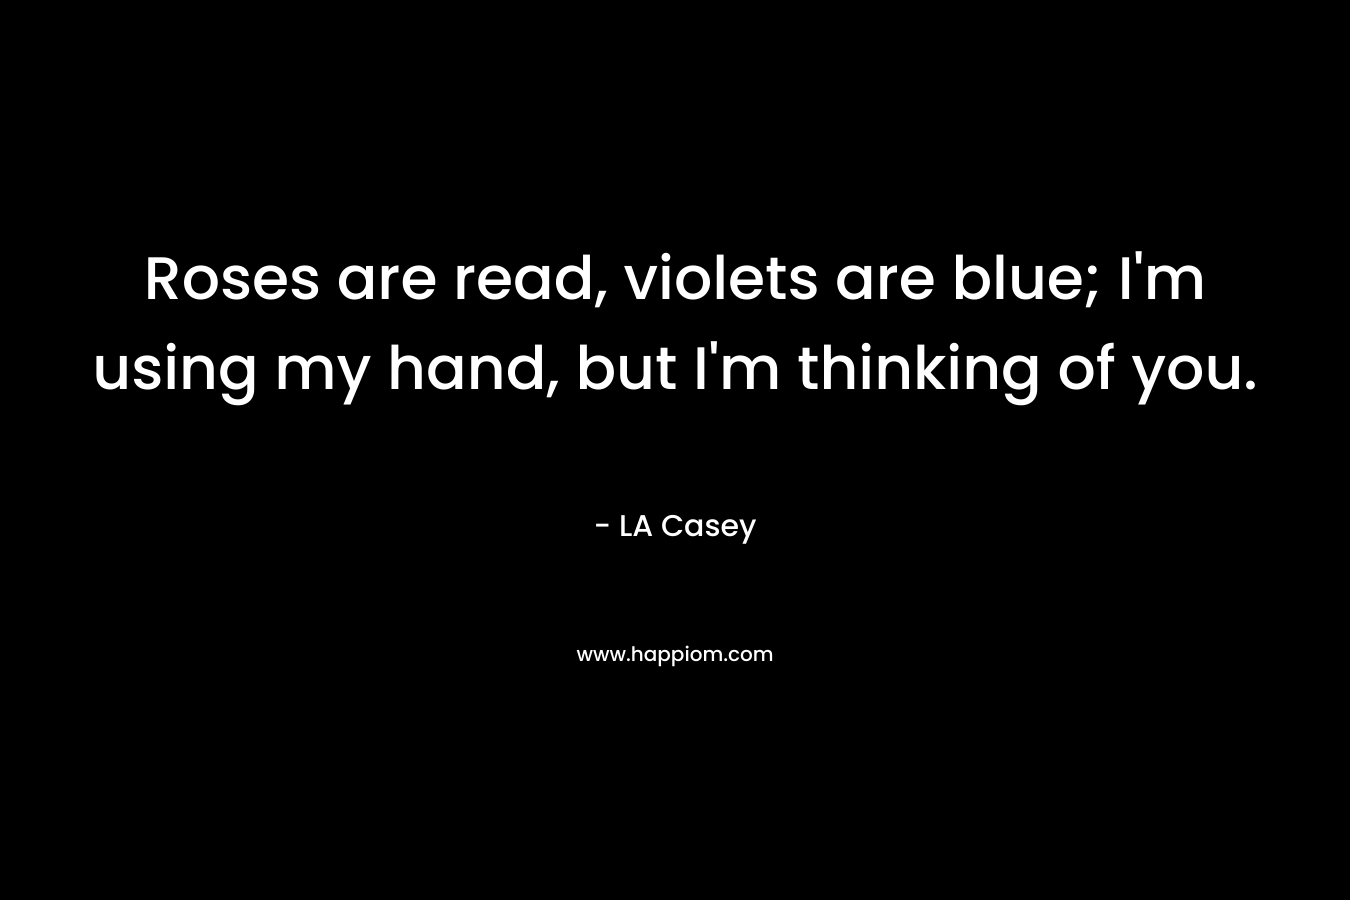 Roses are read, violets are blue; I'm using my hand, but I'm thinking of you.